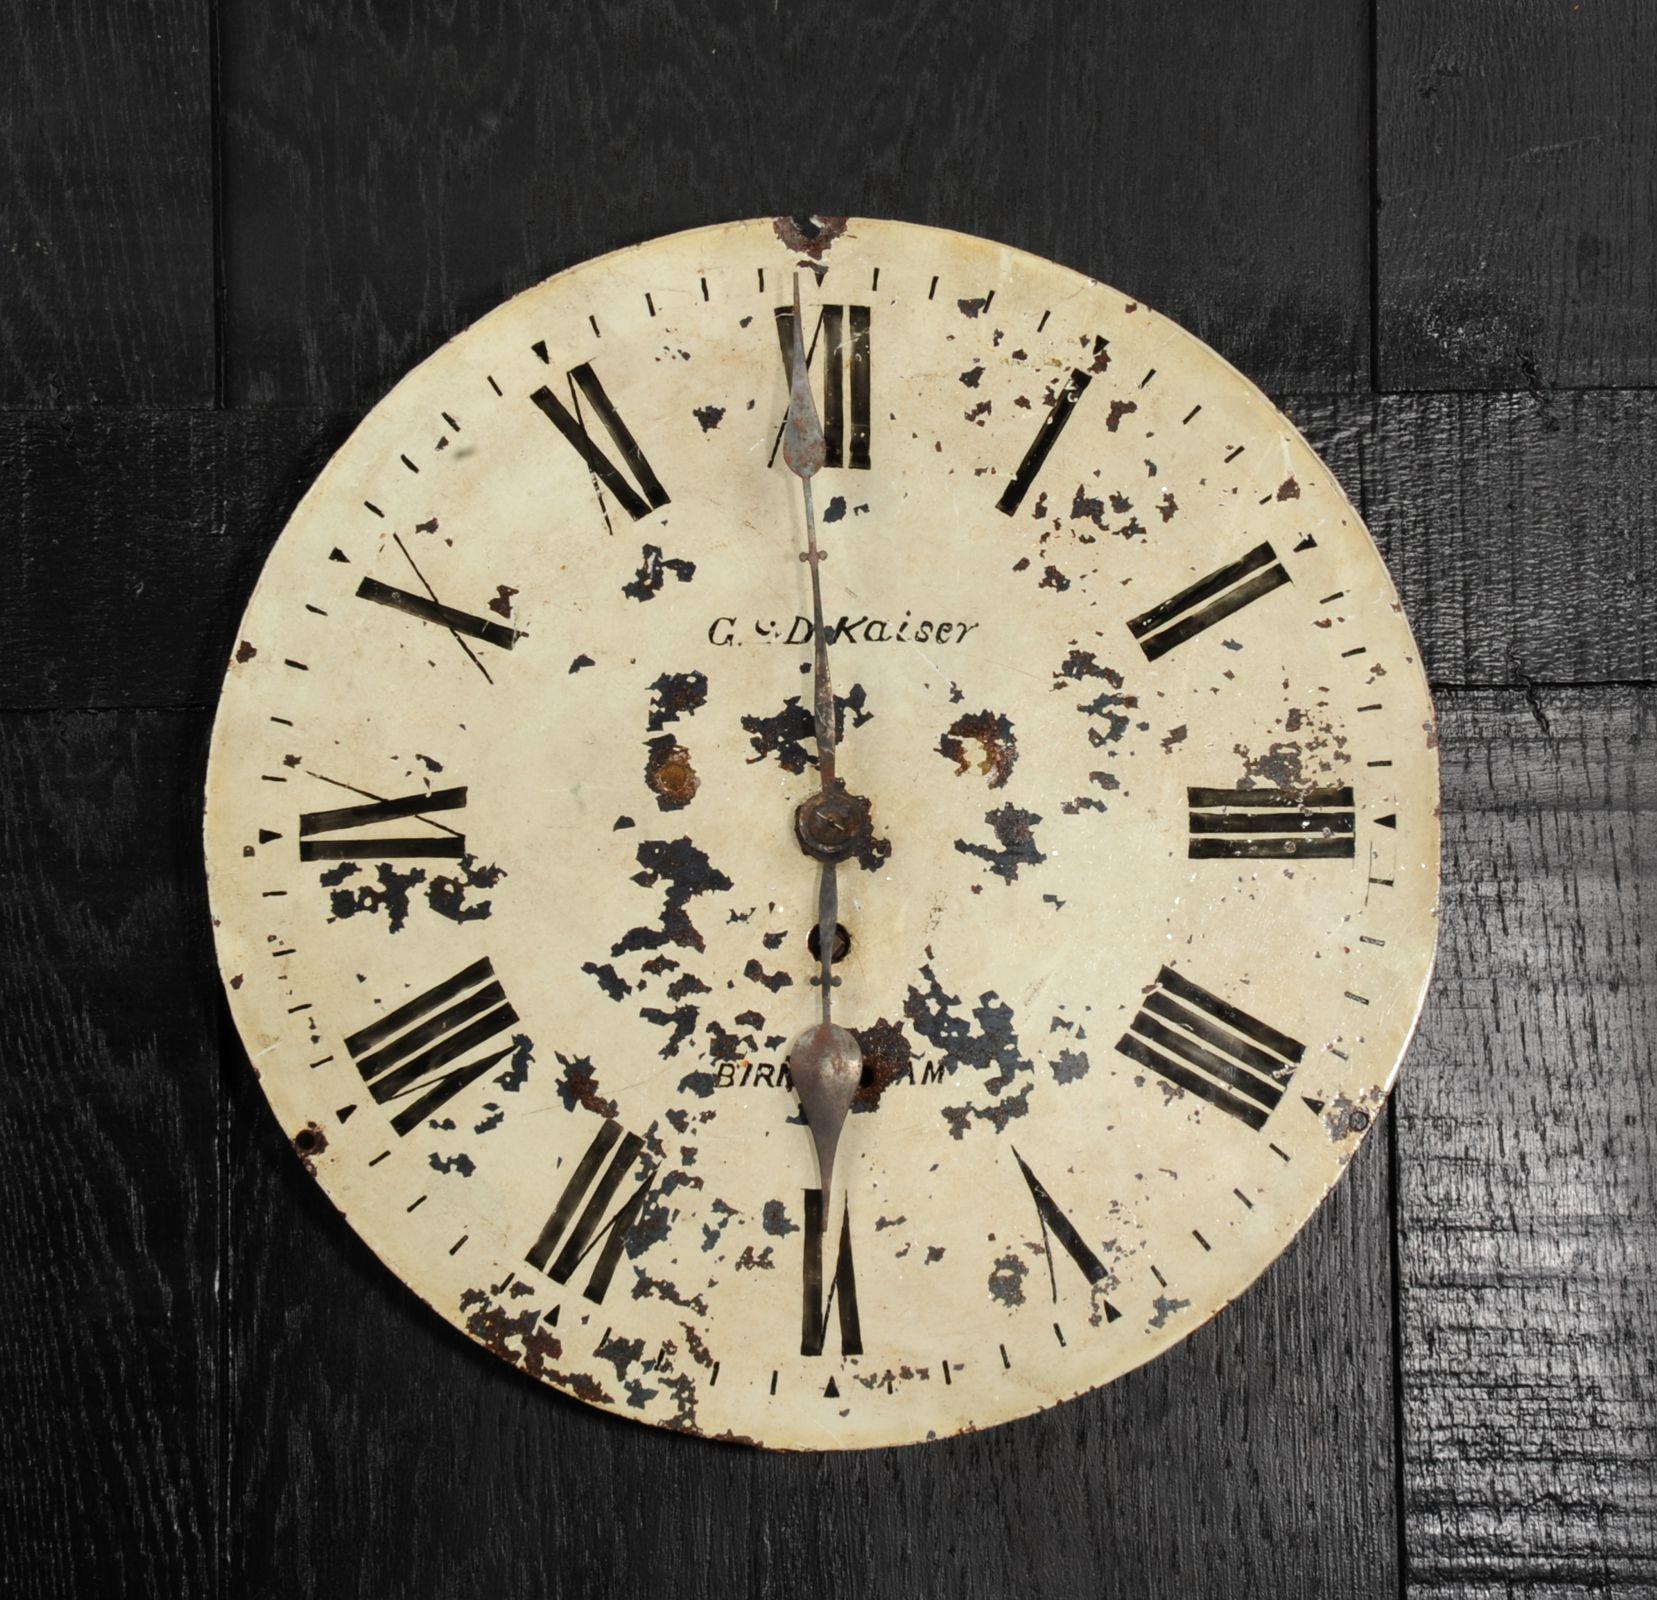 A lovely antique English iron clock dial dating from circa 1880. Reclaimed from the workshop of a crumbling works by our buyer, it bears the scars of a hard life. Beautifully patinated with an ancient craquelure, paint loss and rust. The fine, once